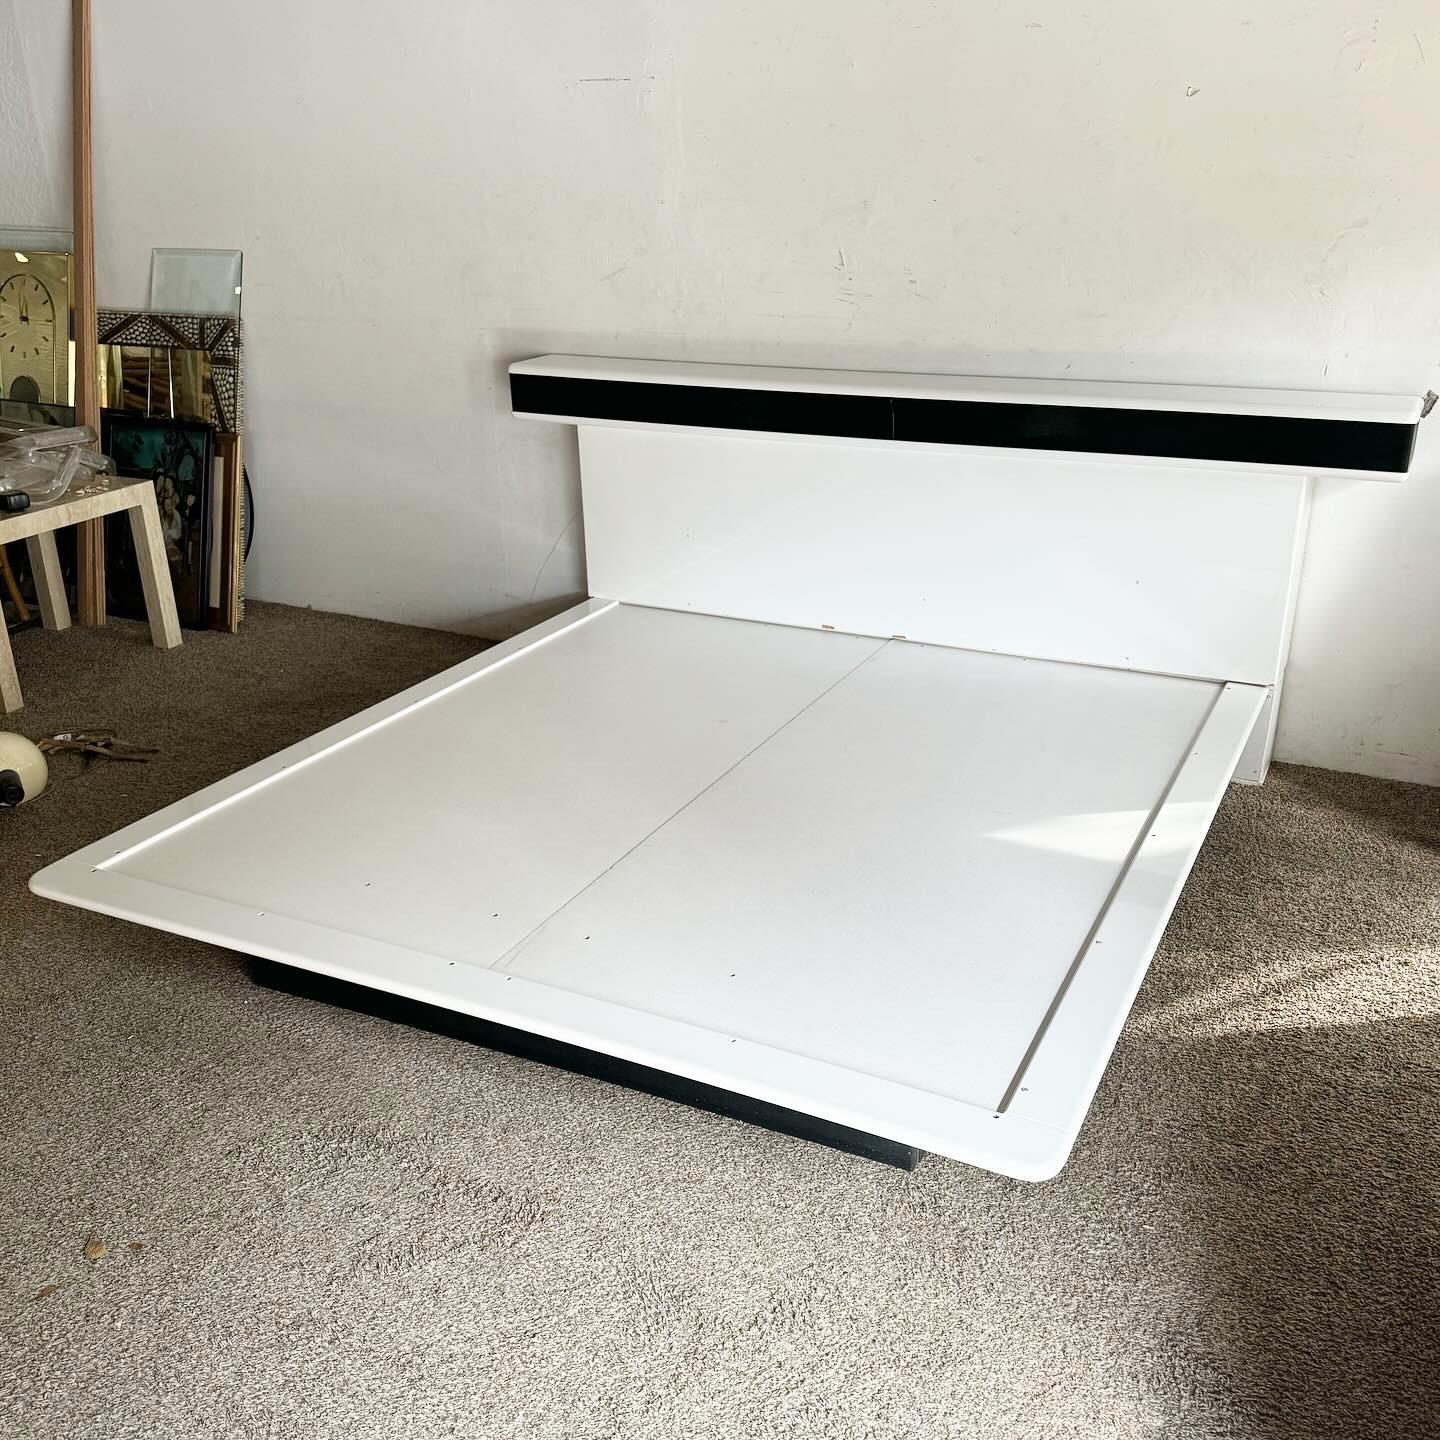 Dive into the future of bedroom style with the Postmodern Storm Trooper White Lacquered and Black Long Platform Bed. This bed features a white lacquered finish with black accents, inspired by Storm Trooper aesthetics. The long platform design offers